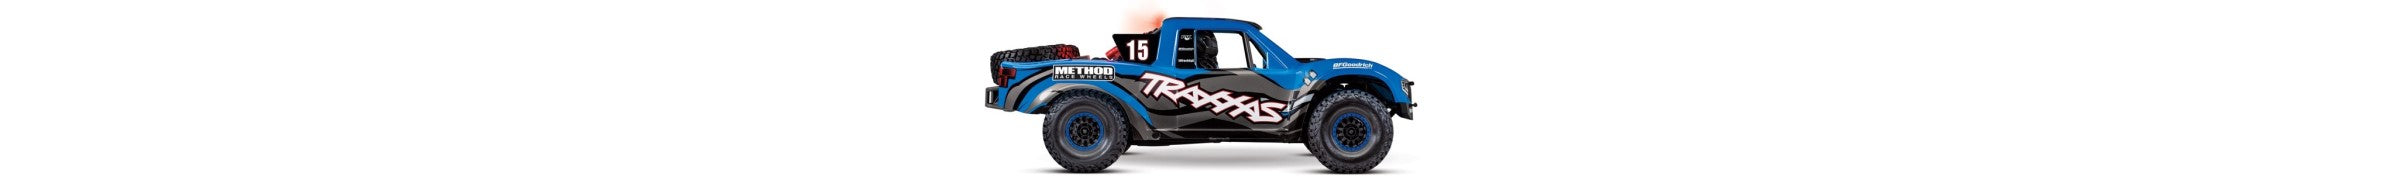 Parts For 85086-4 Unlimited Desert Racer UDR 1/7 4WD VXL Brushless Short Course Truck with Light Kit